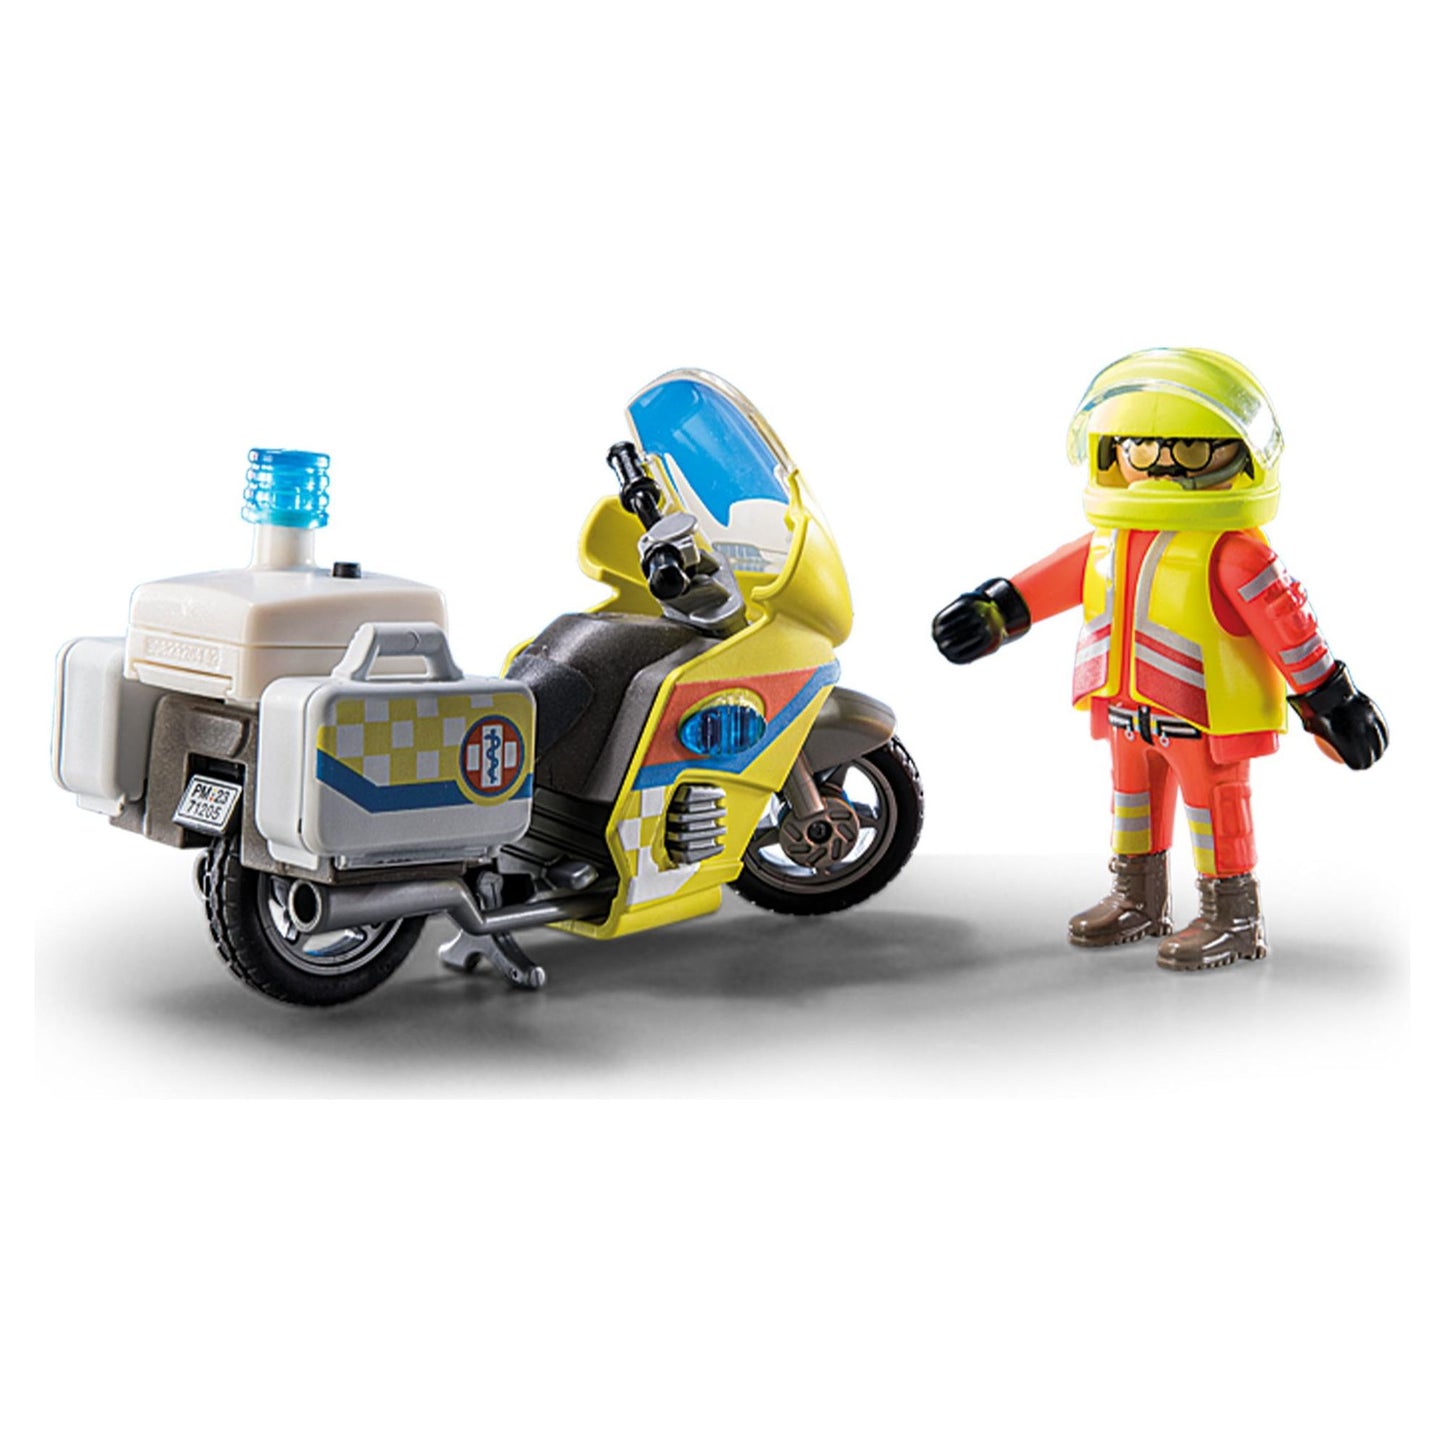 City Life Rescue Motorcycle with Flashing Light